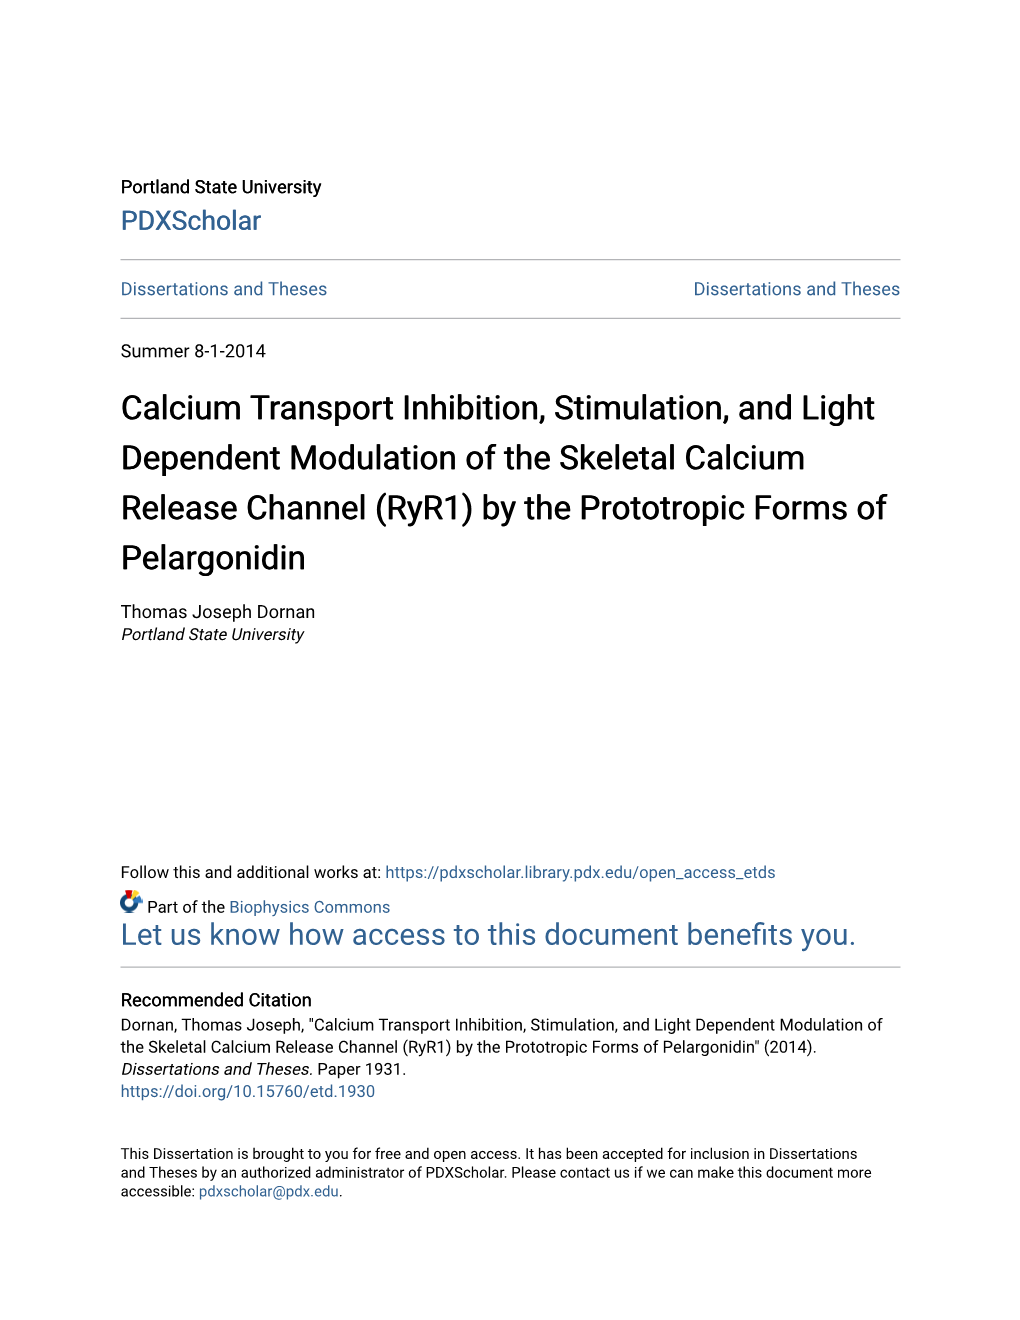 Calcium Transport Inhibition, Stimulation, and Light Dependent Modulation of the Skeletal Calcium Release Channel (Ryr1) by the Prototropic Forms of Pelargonidin